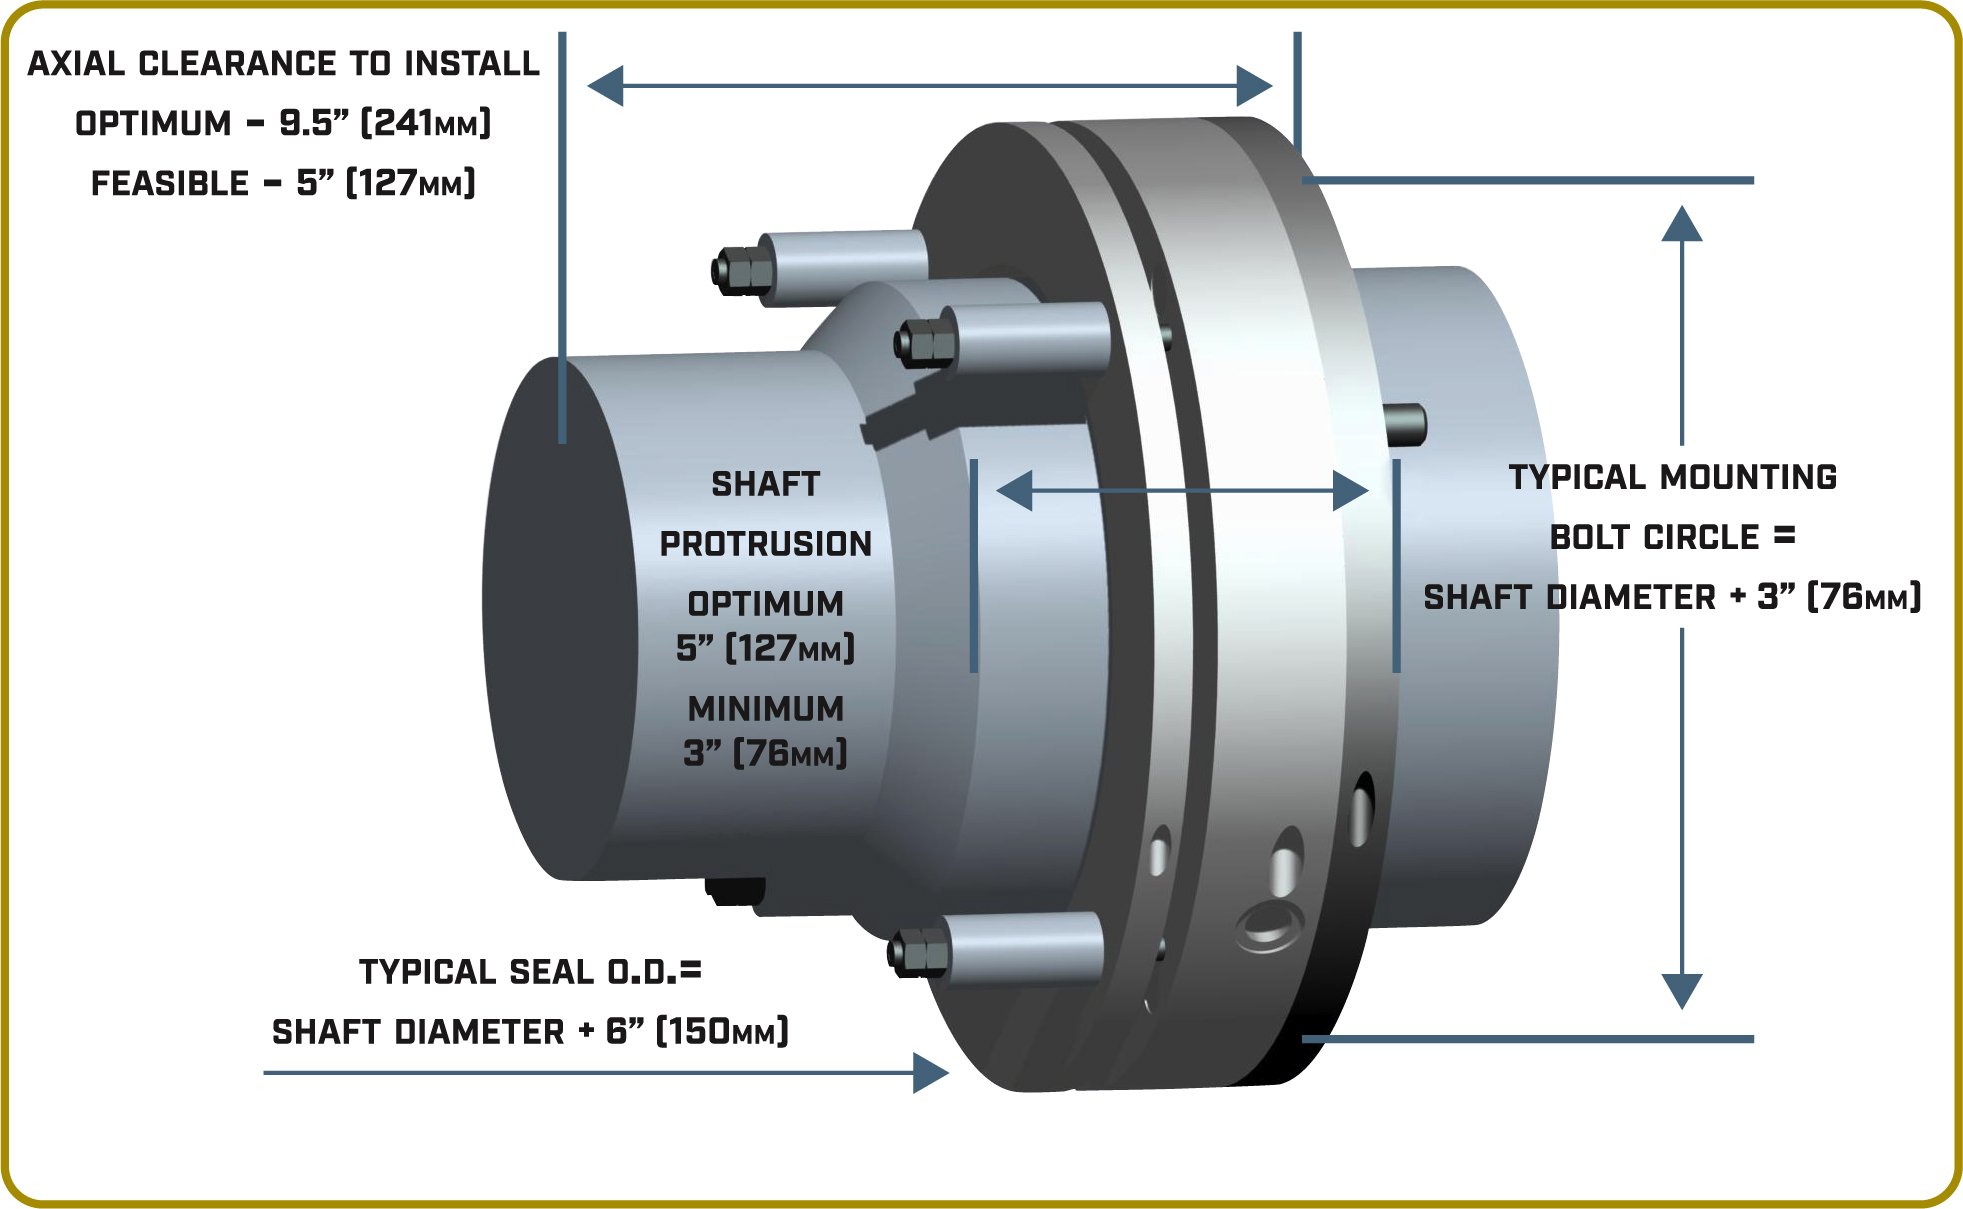 Figure 3: Typical dimensions for a MECO EP Type-2 Seal. Source: MECO Seals